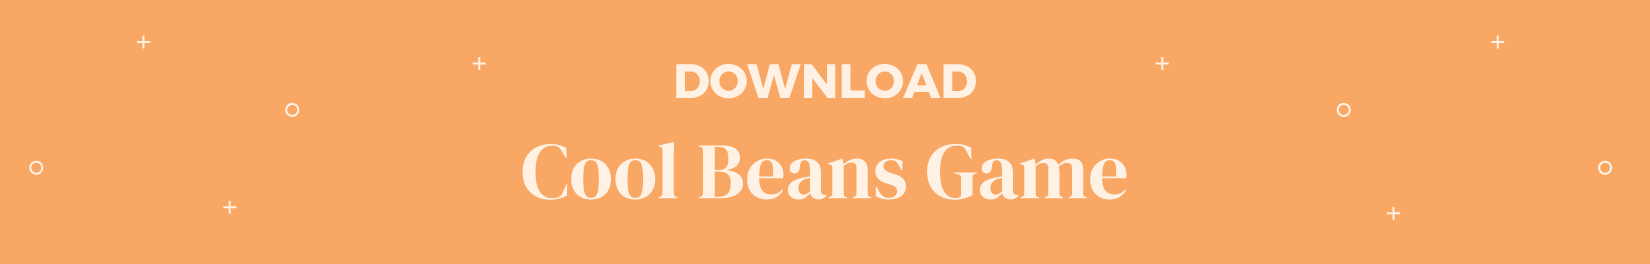 Cool beans game download button.